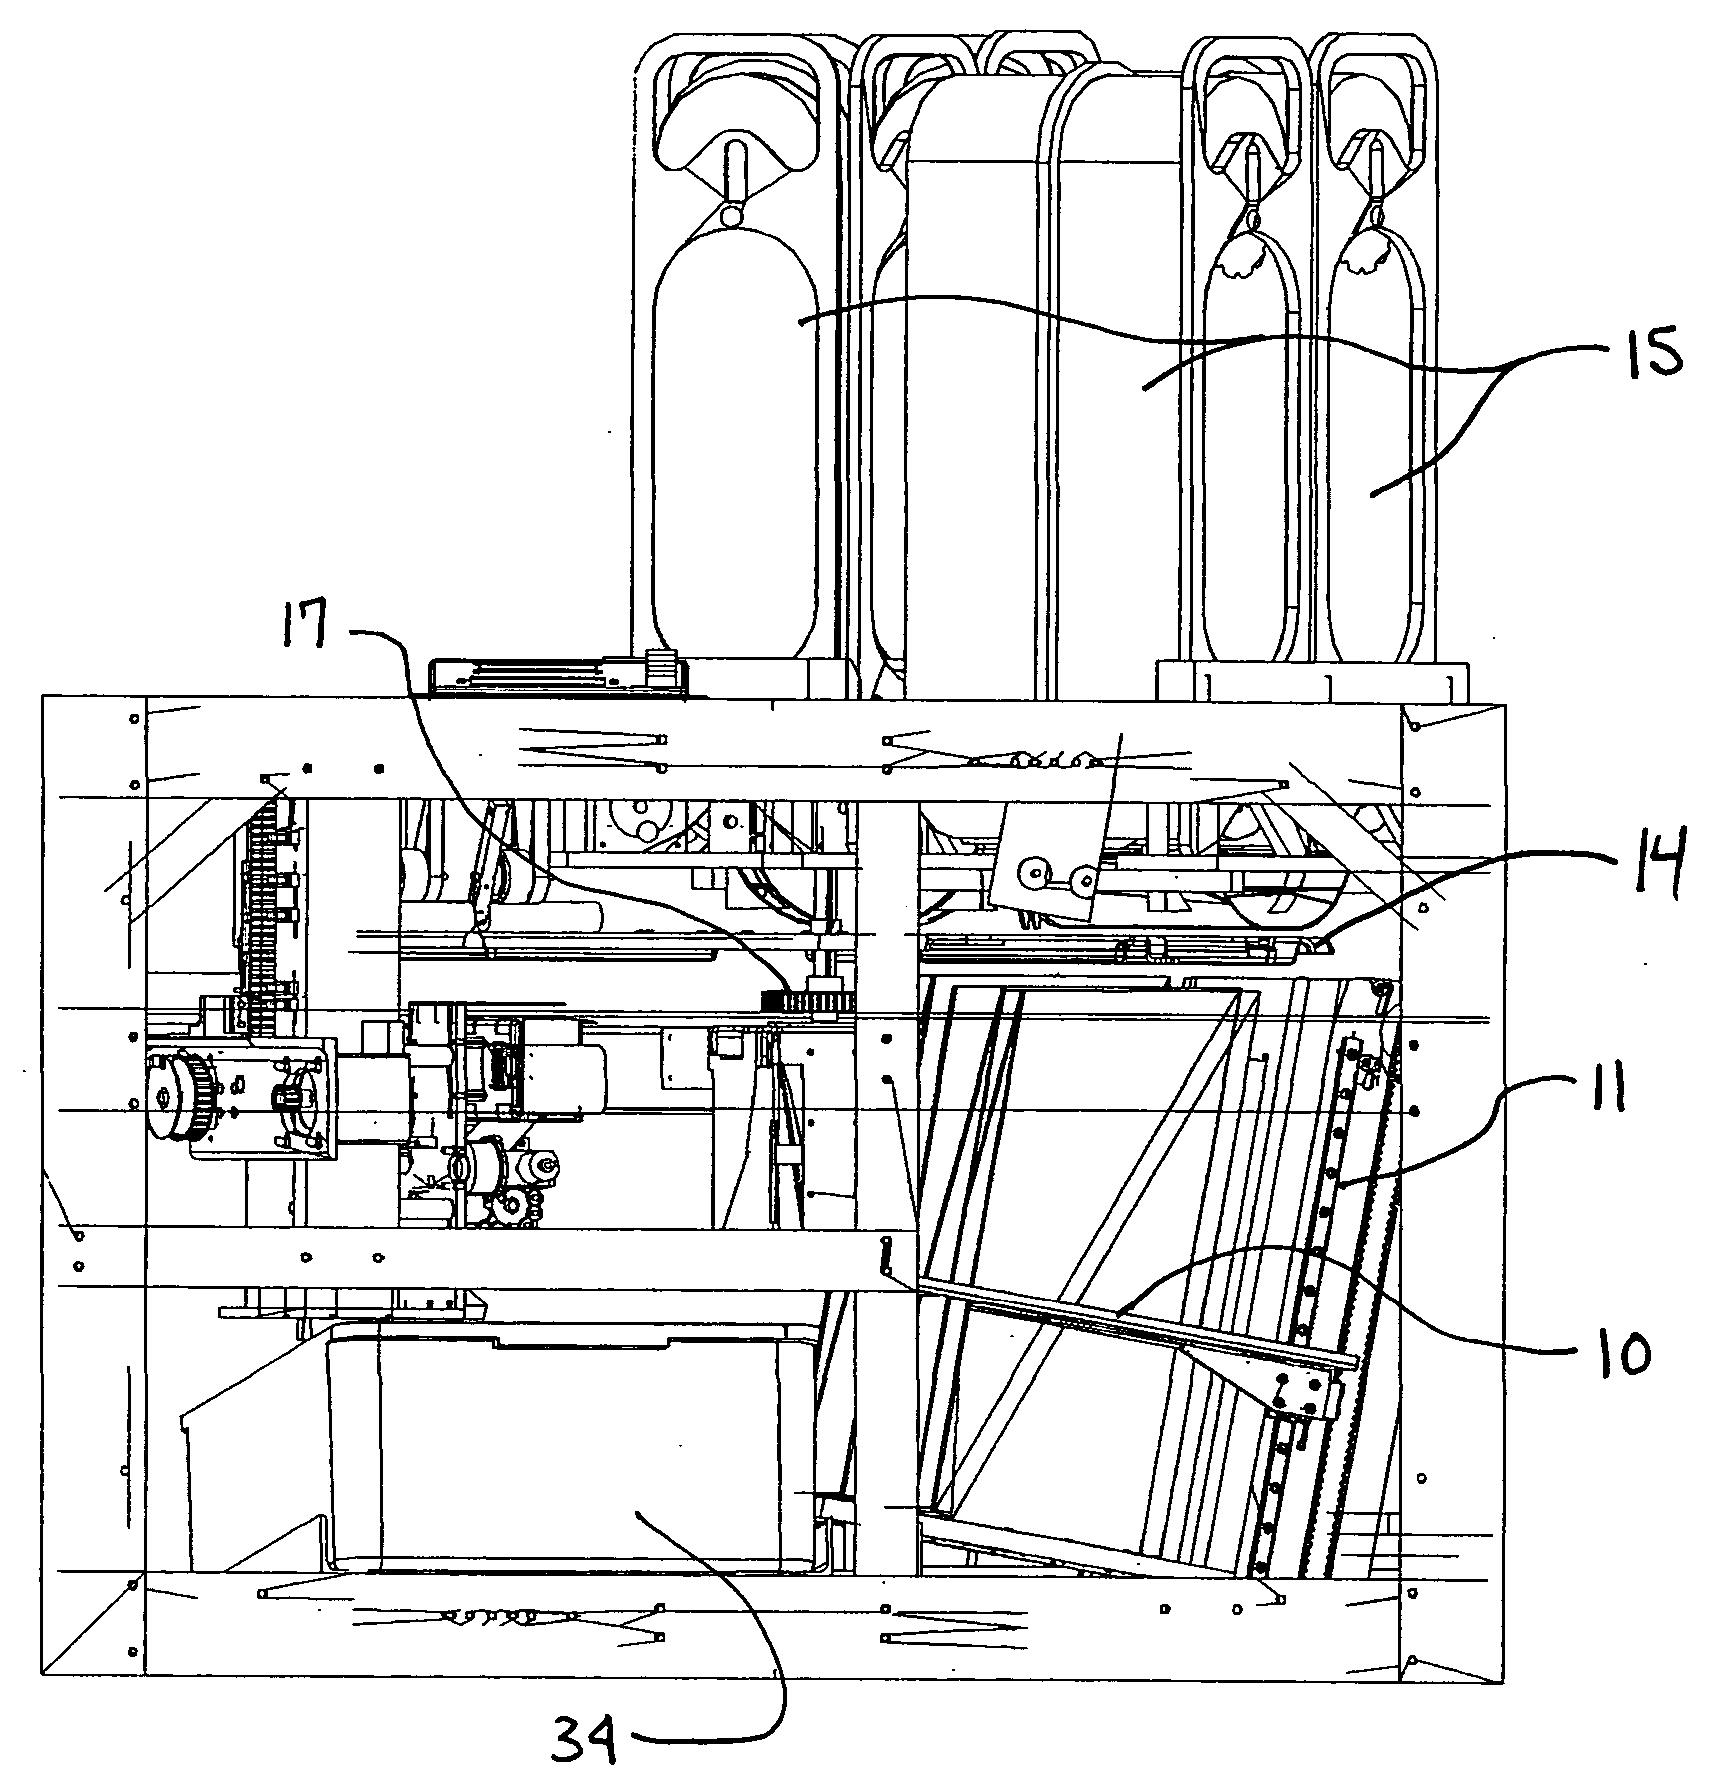 Apparatus and method for wrapping